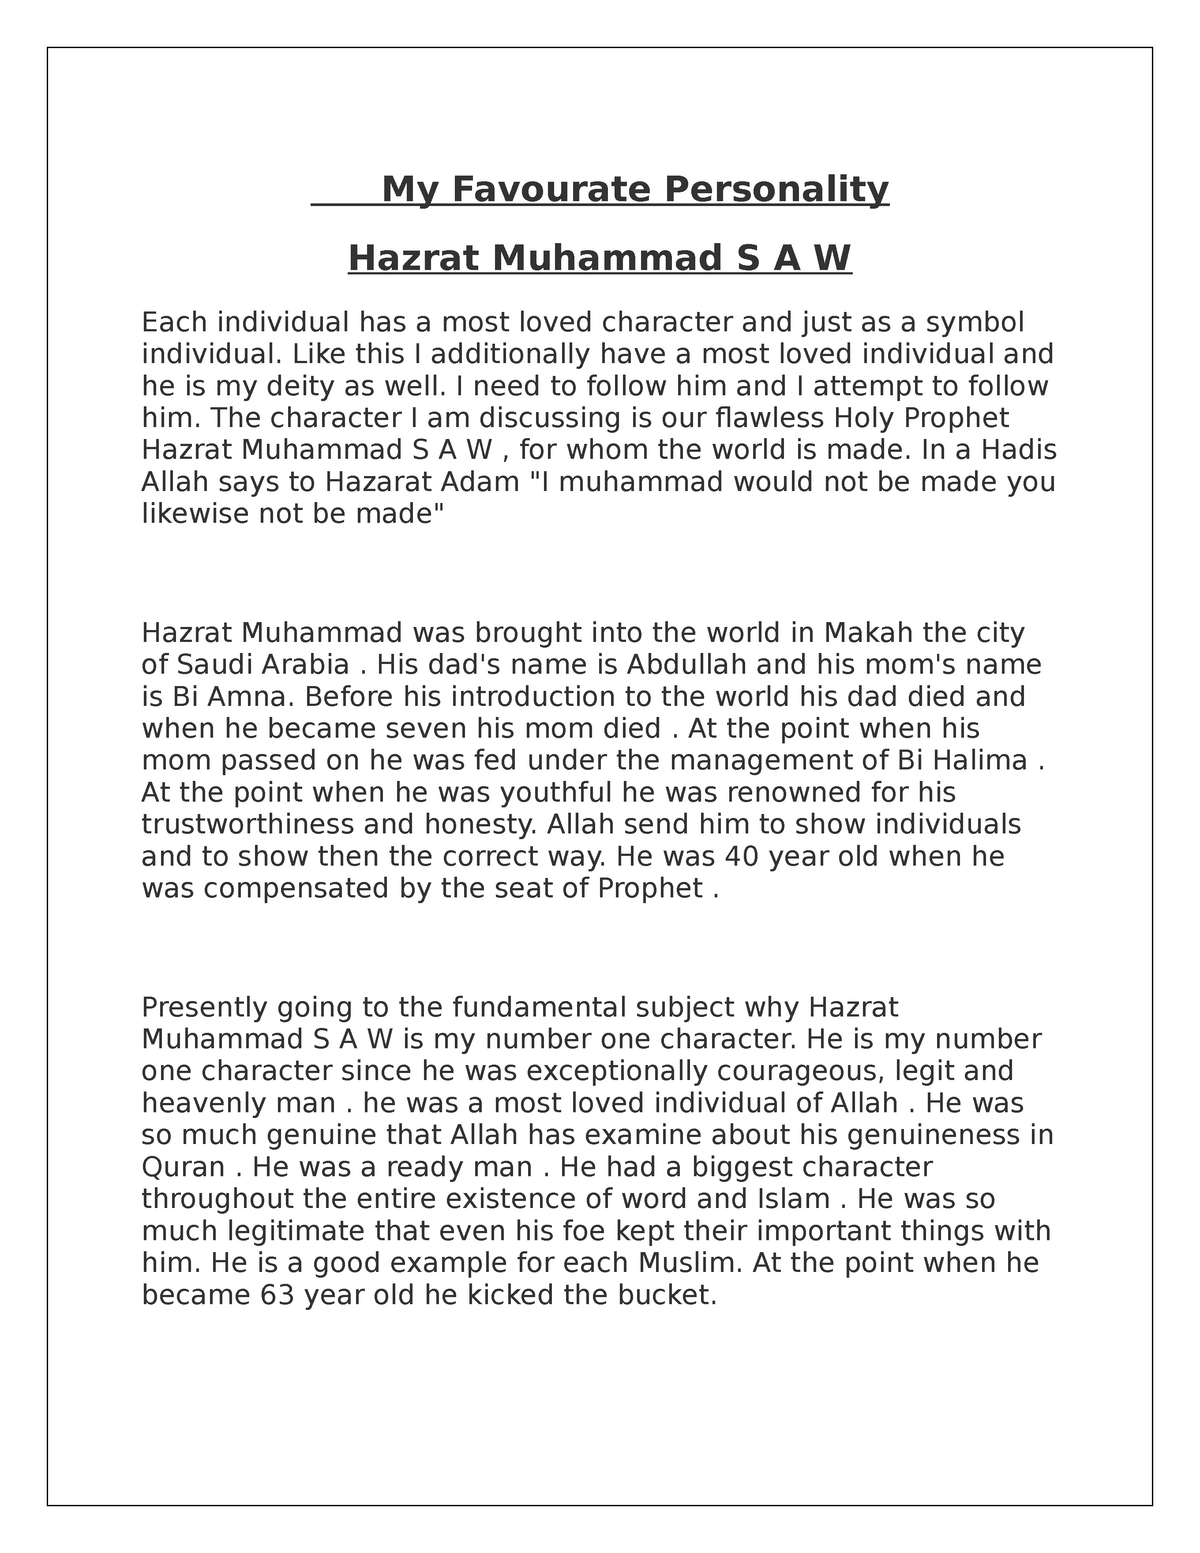 essay on my favourite personality muhammad saw